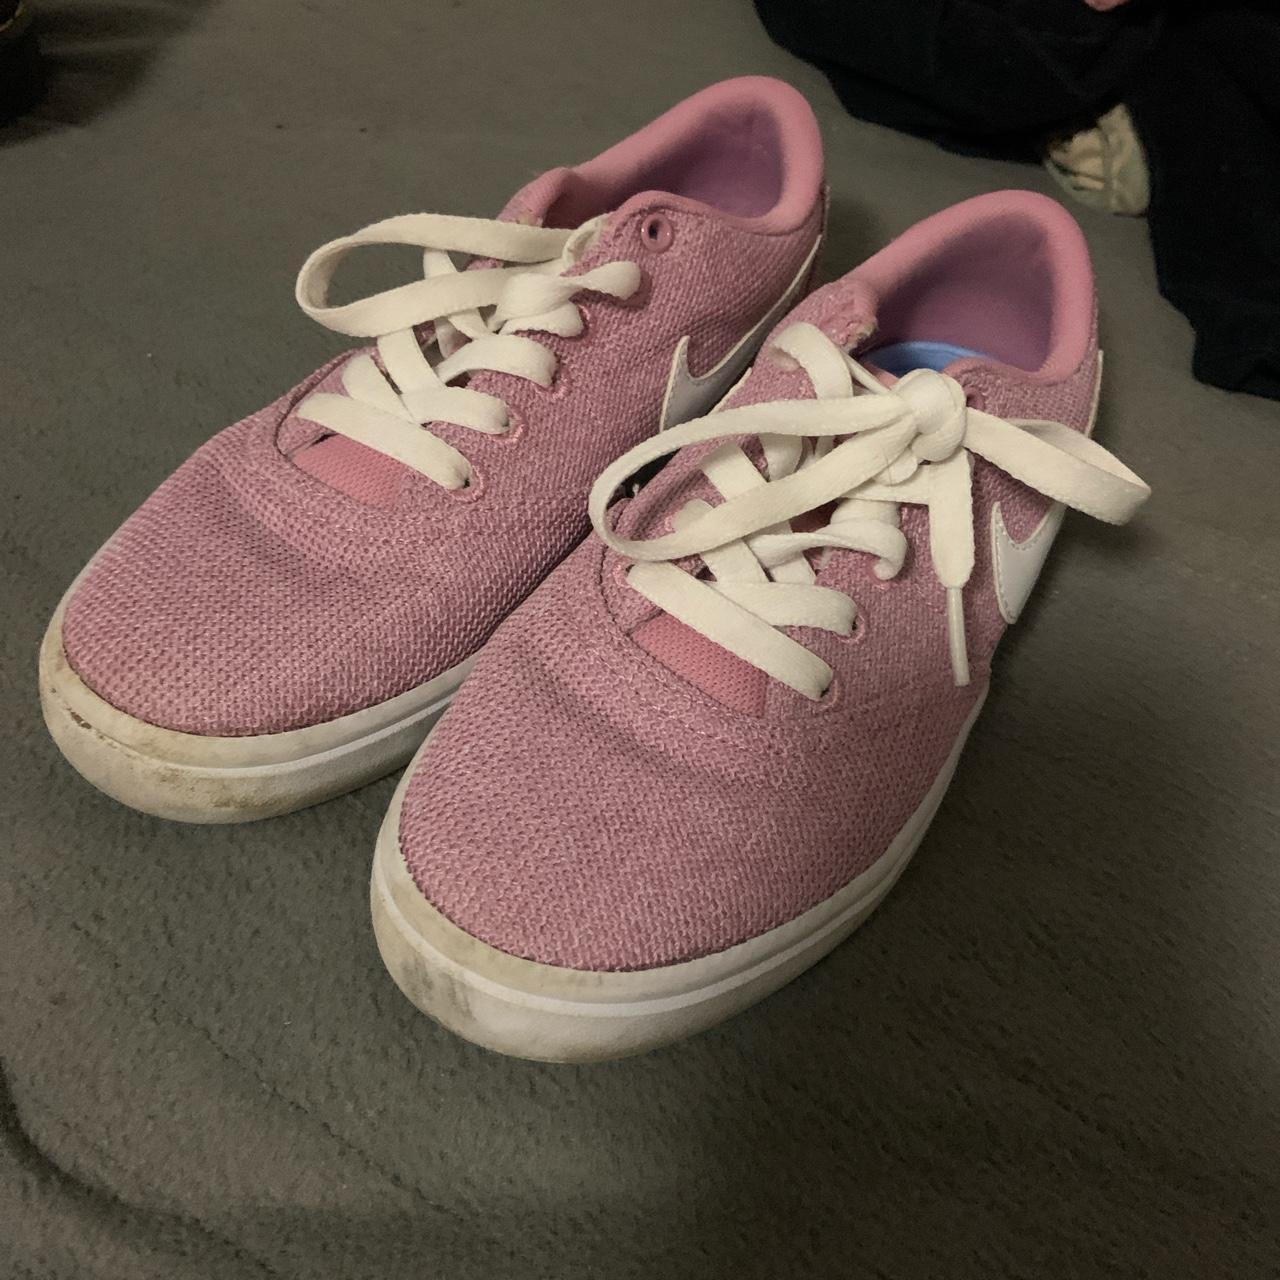 Nike Women's Pink and White Trainers